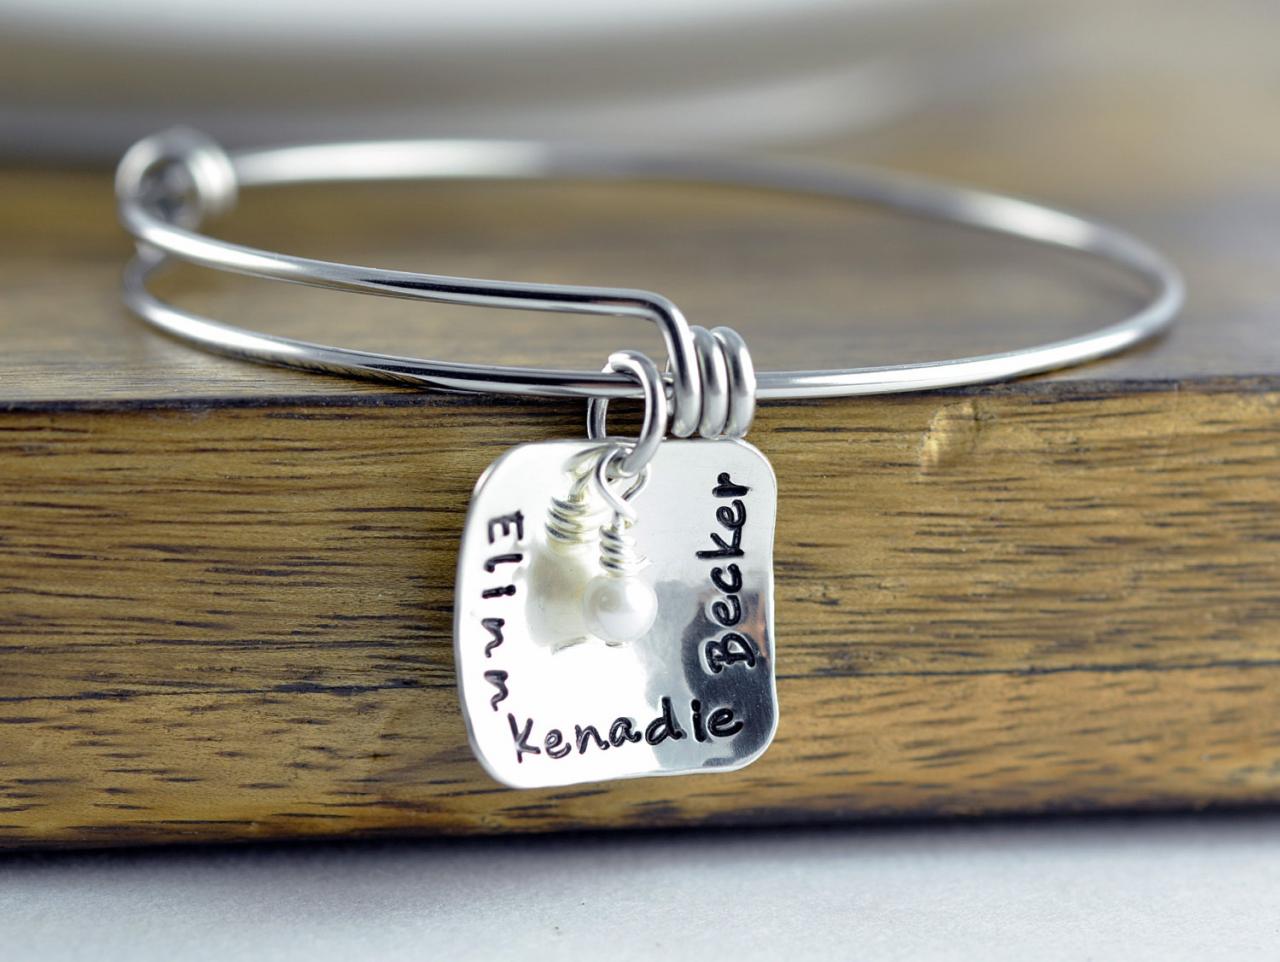 Personalized Sterling Silver Bangle Bracelet, Name Bracelet, Personalized Jewelry Gift, Hand Stamped Gifts, Pearl Jewelry, Gift For Her